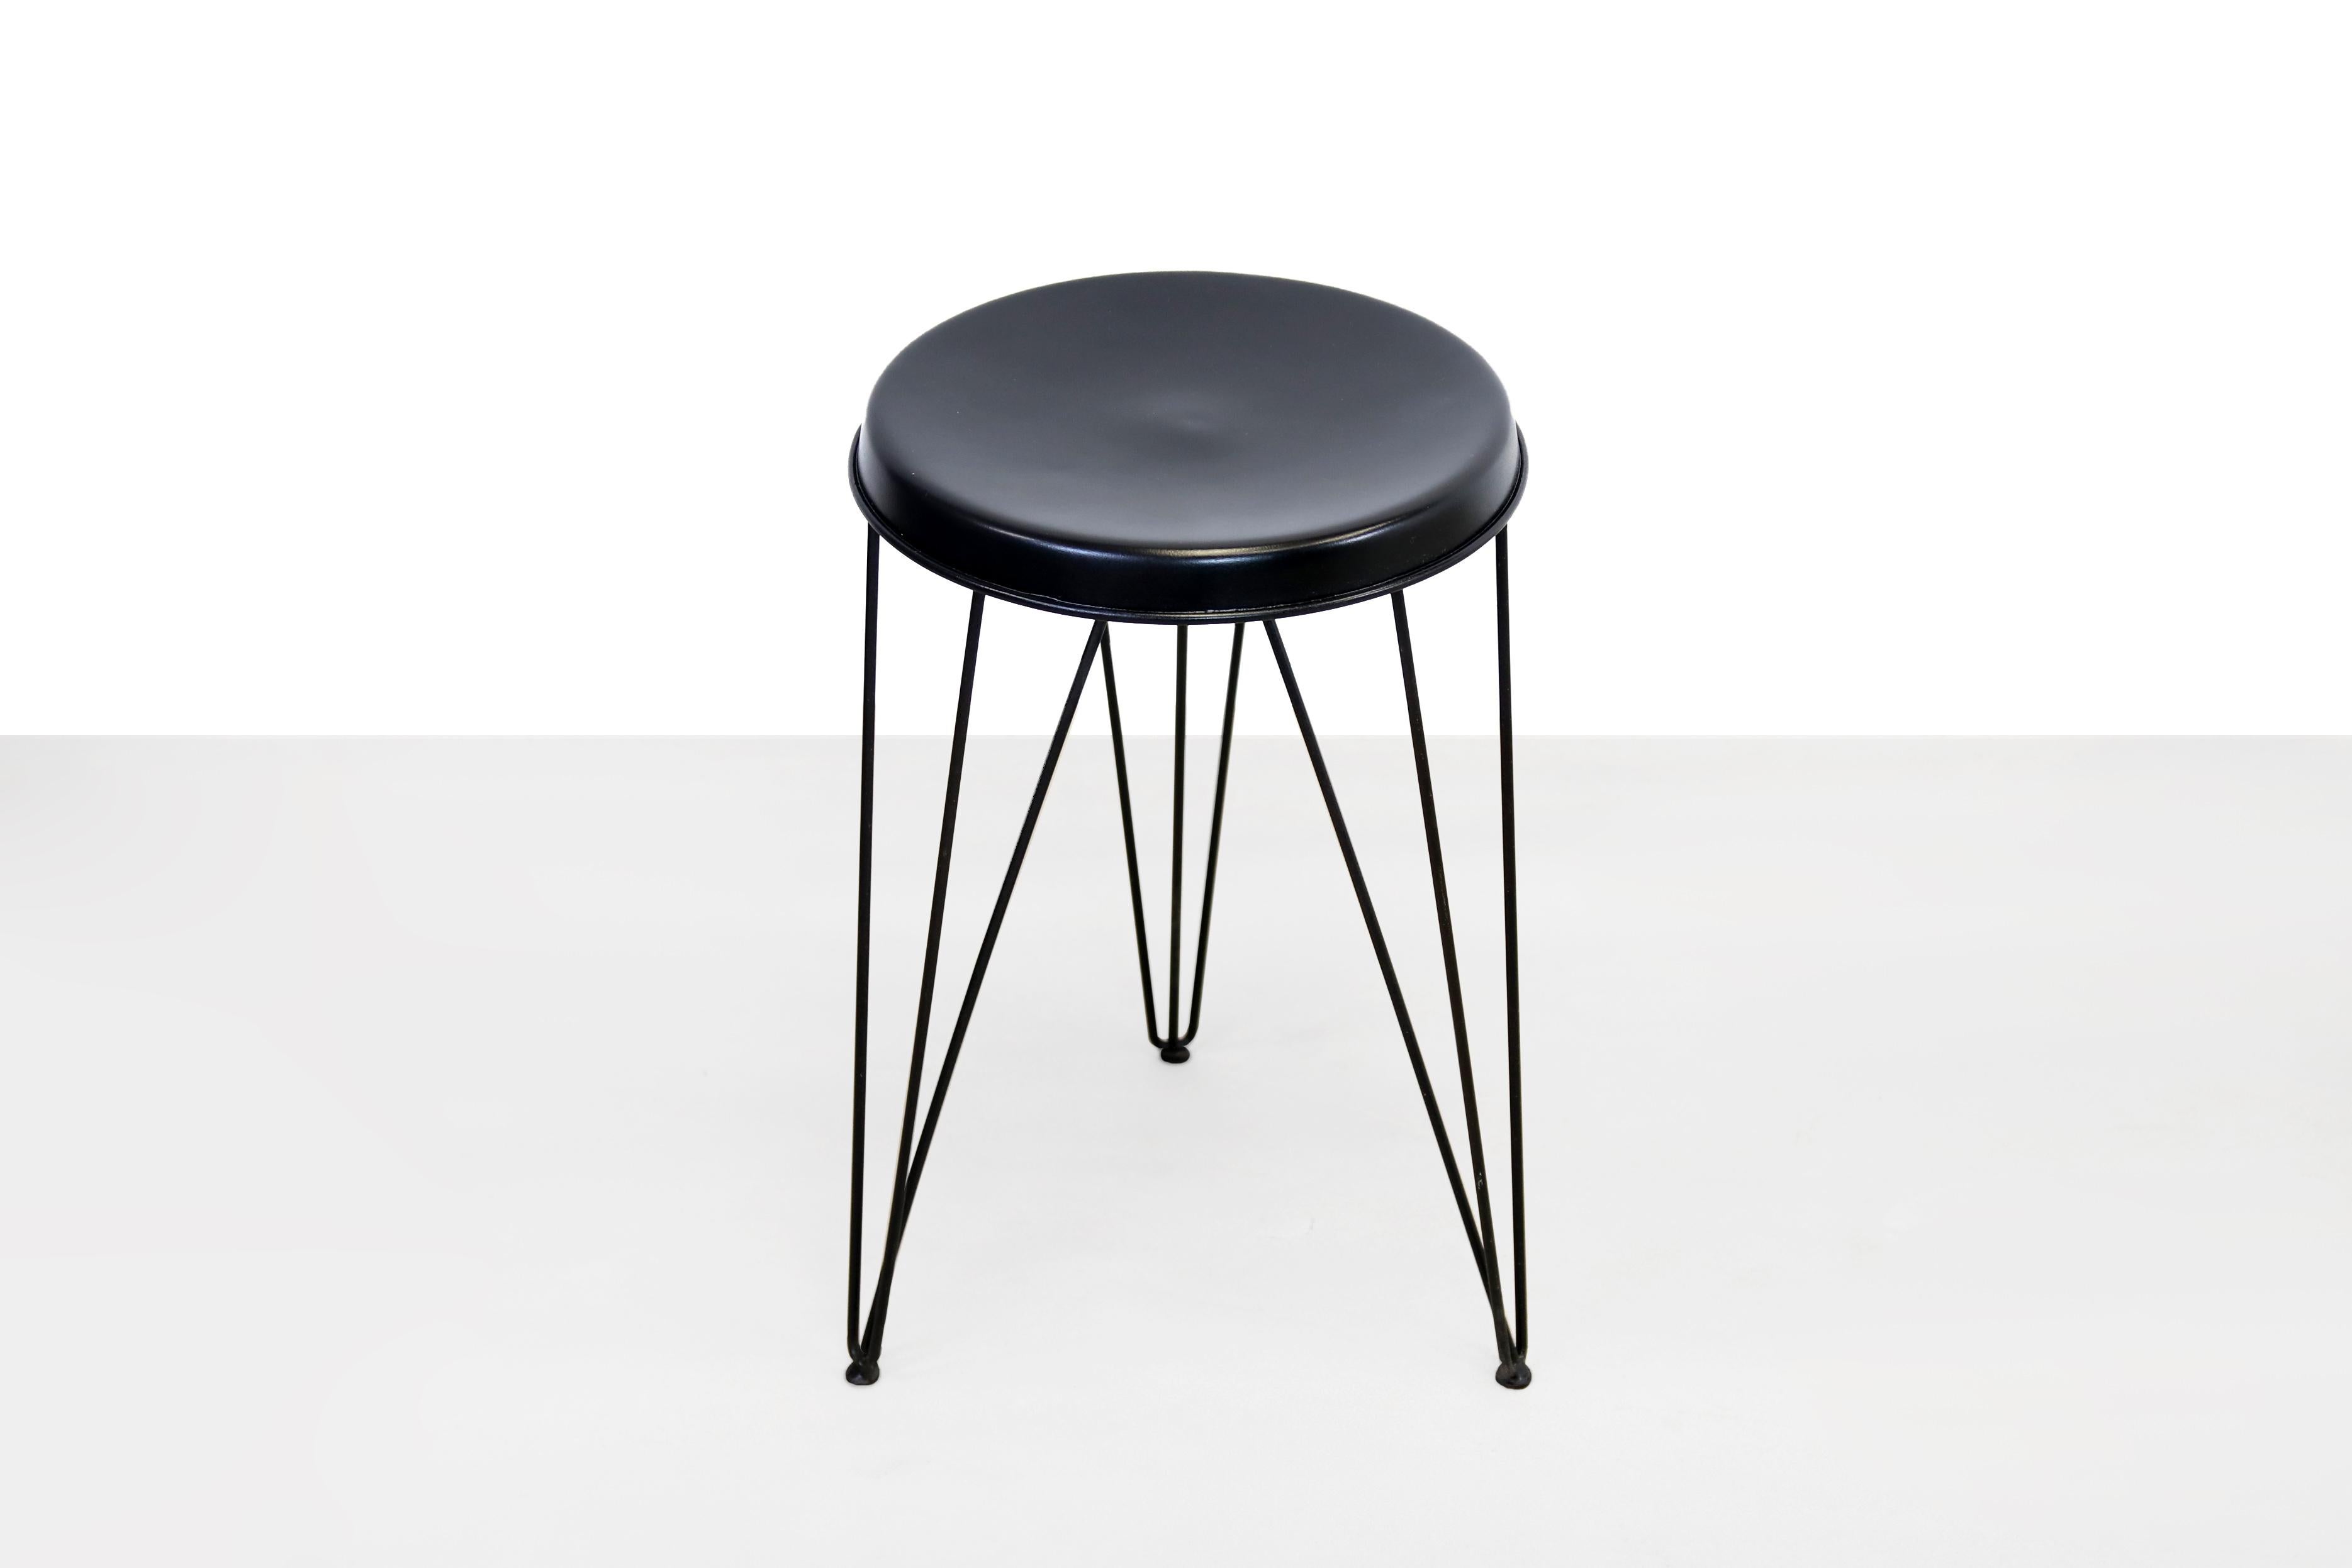 Very nice Minimalist stool by Tjerk Reijenga for Pilastro. The black lacquered wire steel base is special. The legs are a feast for the eyes. The seat is black lacquered metal. An eye-catcher for any interior. Intended as a stool, but can also be